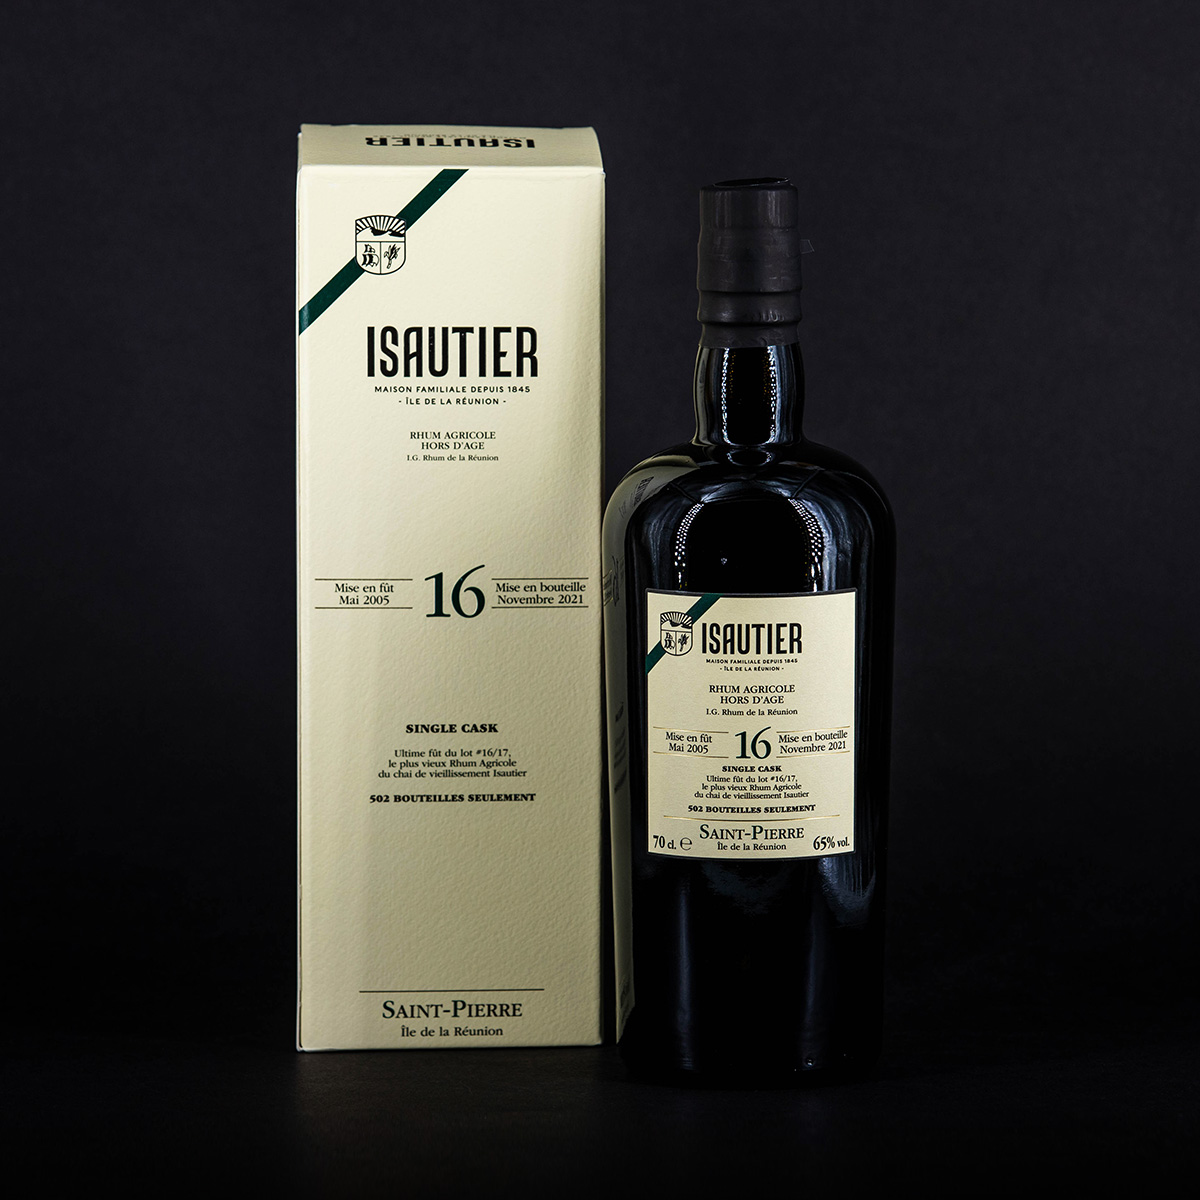 Isautier - Aged 16 years - Single Cask - Rhum agricole hors d'age